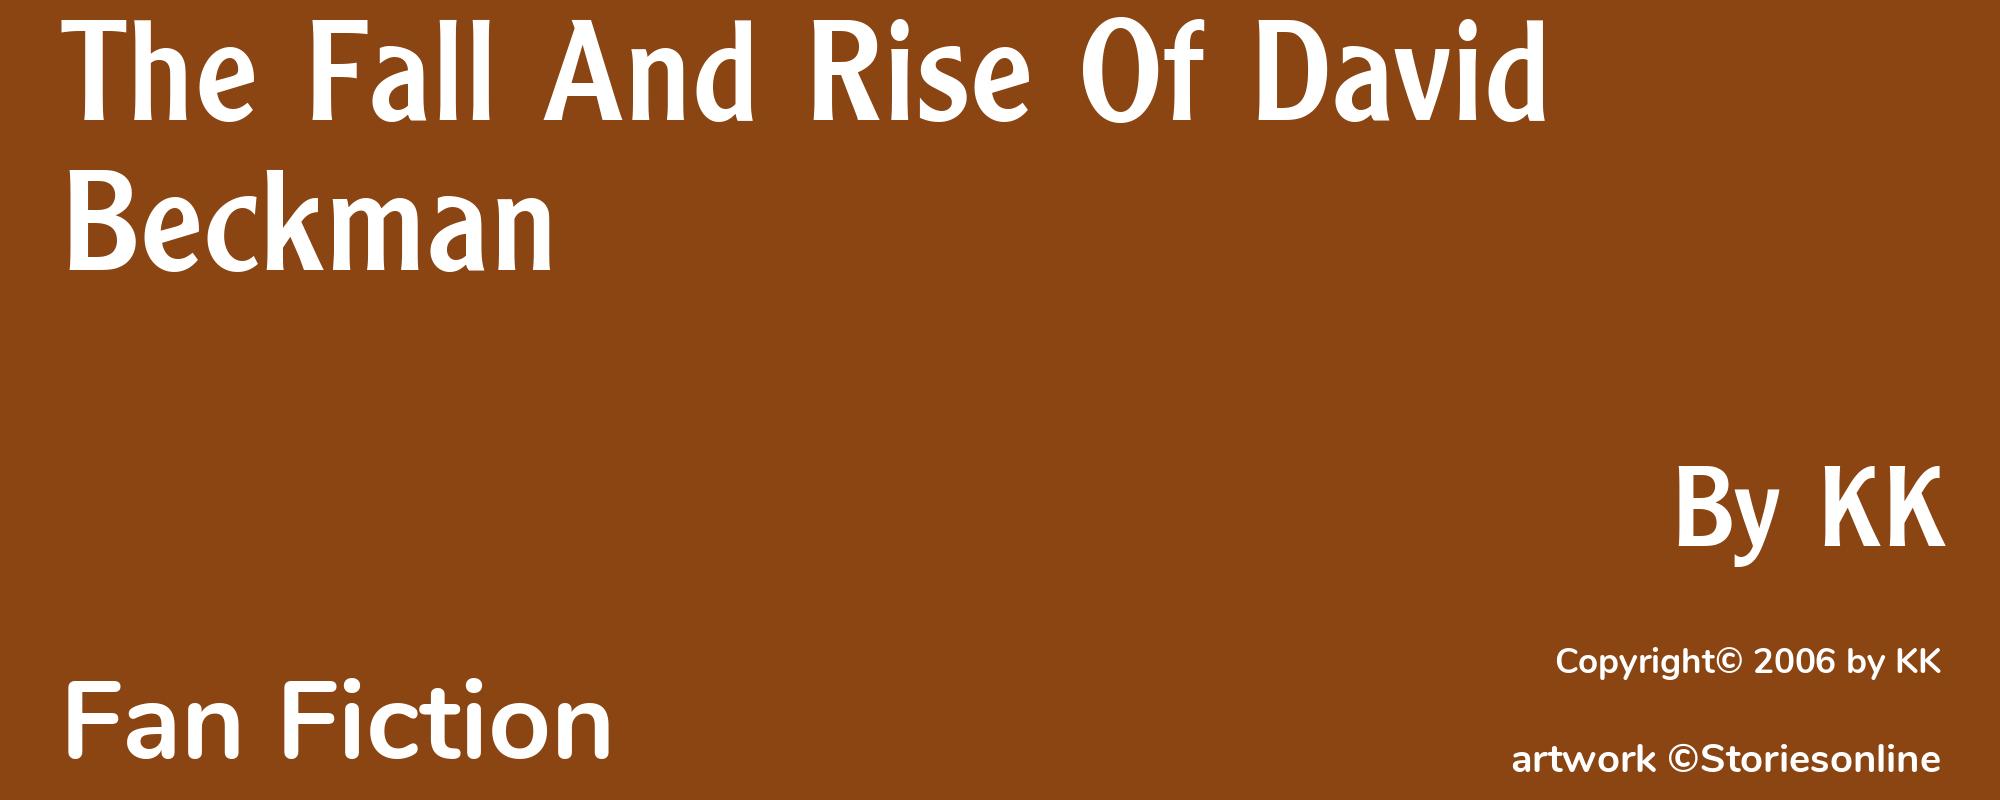 The Fall And Rise Of David Beckman  - Cover